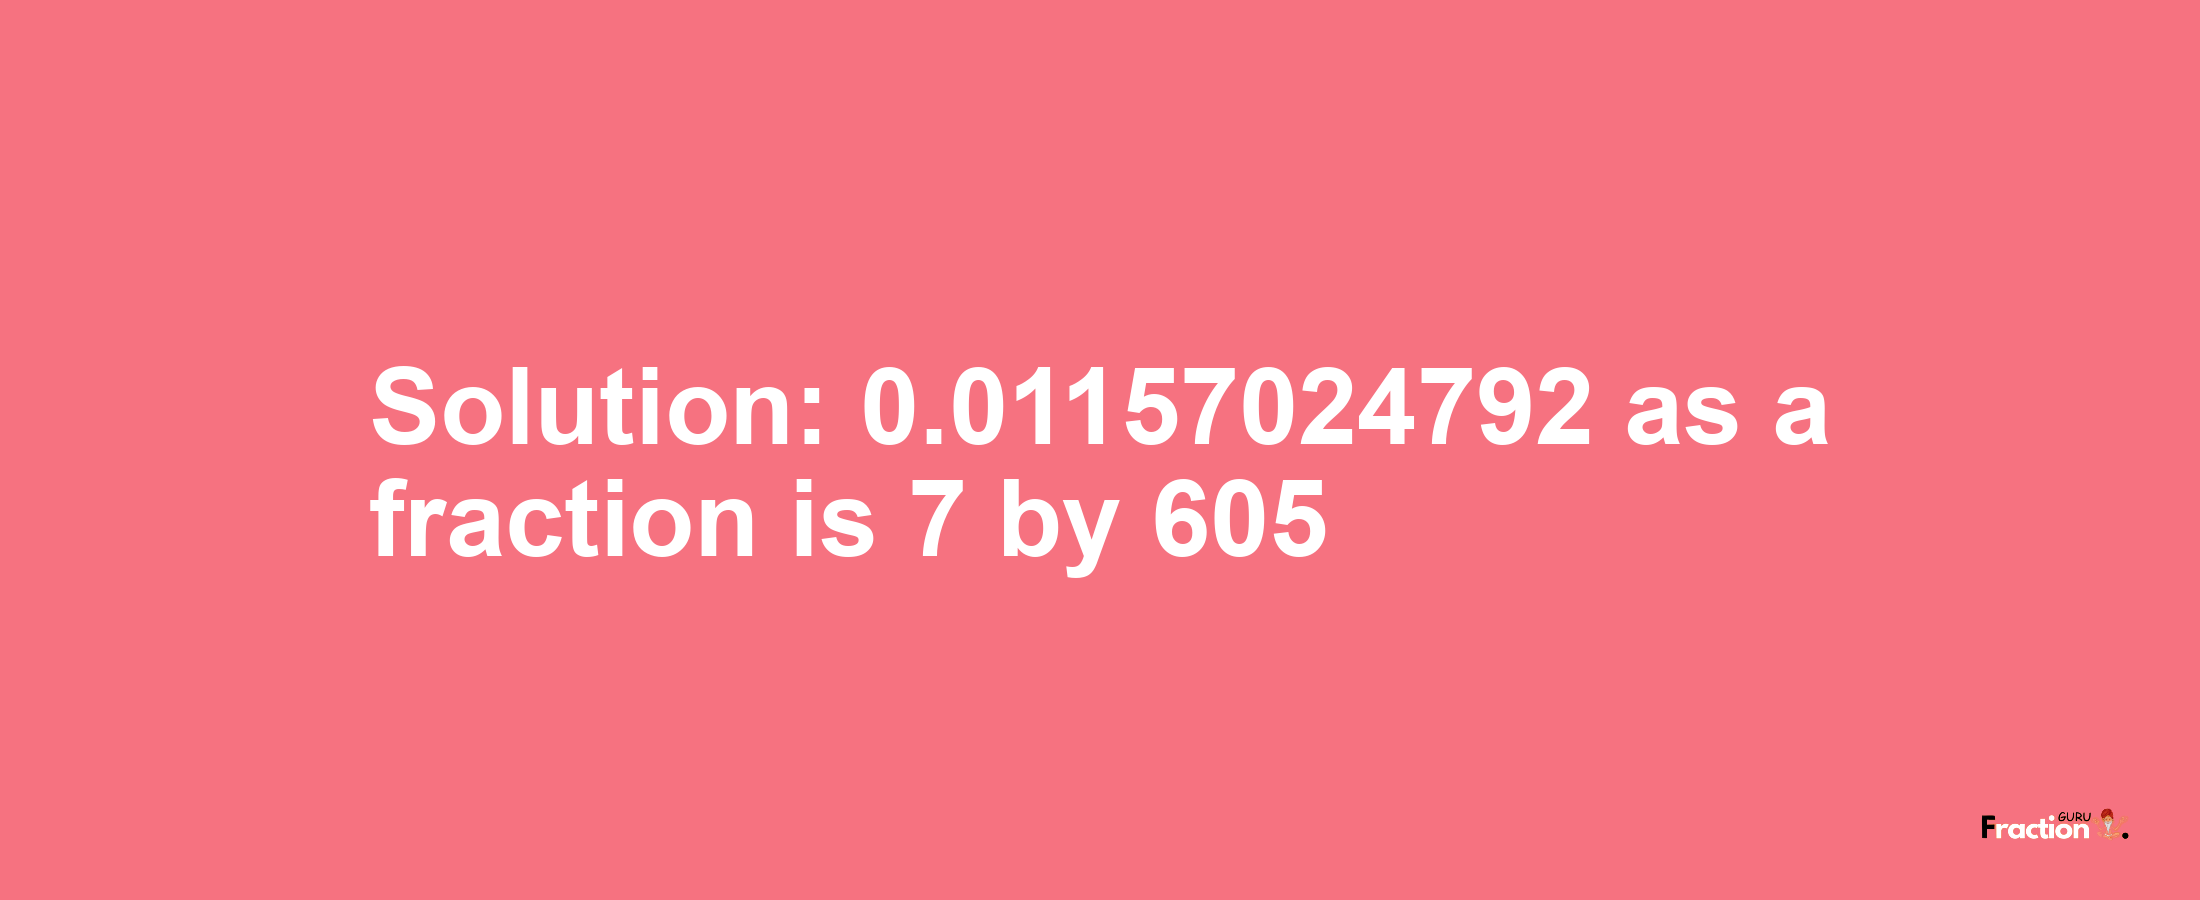 Solution:0.01157024792 as a fraction is 7/605